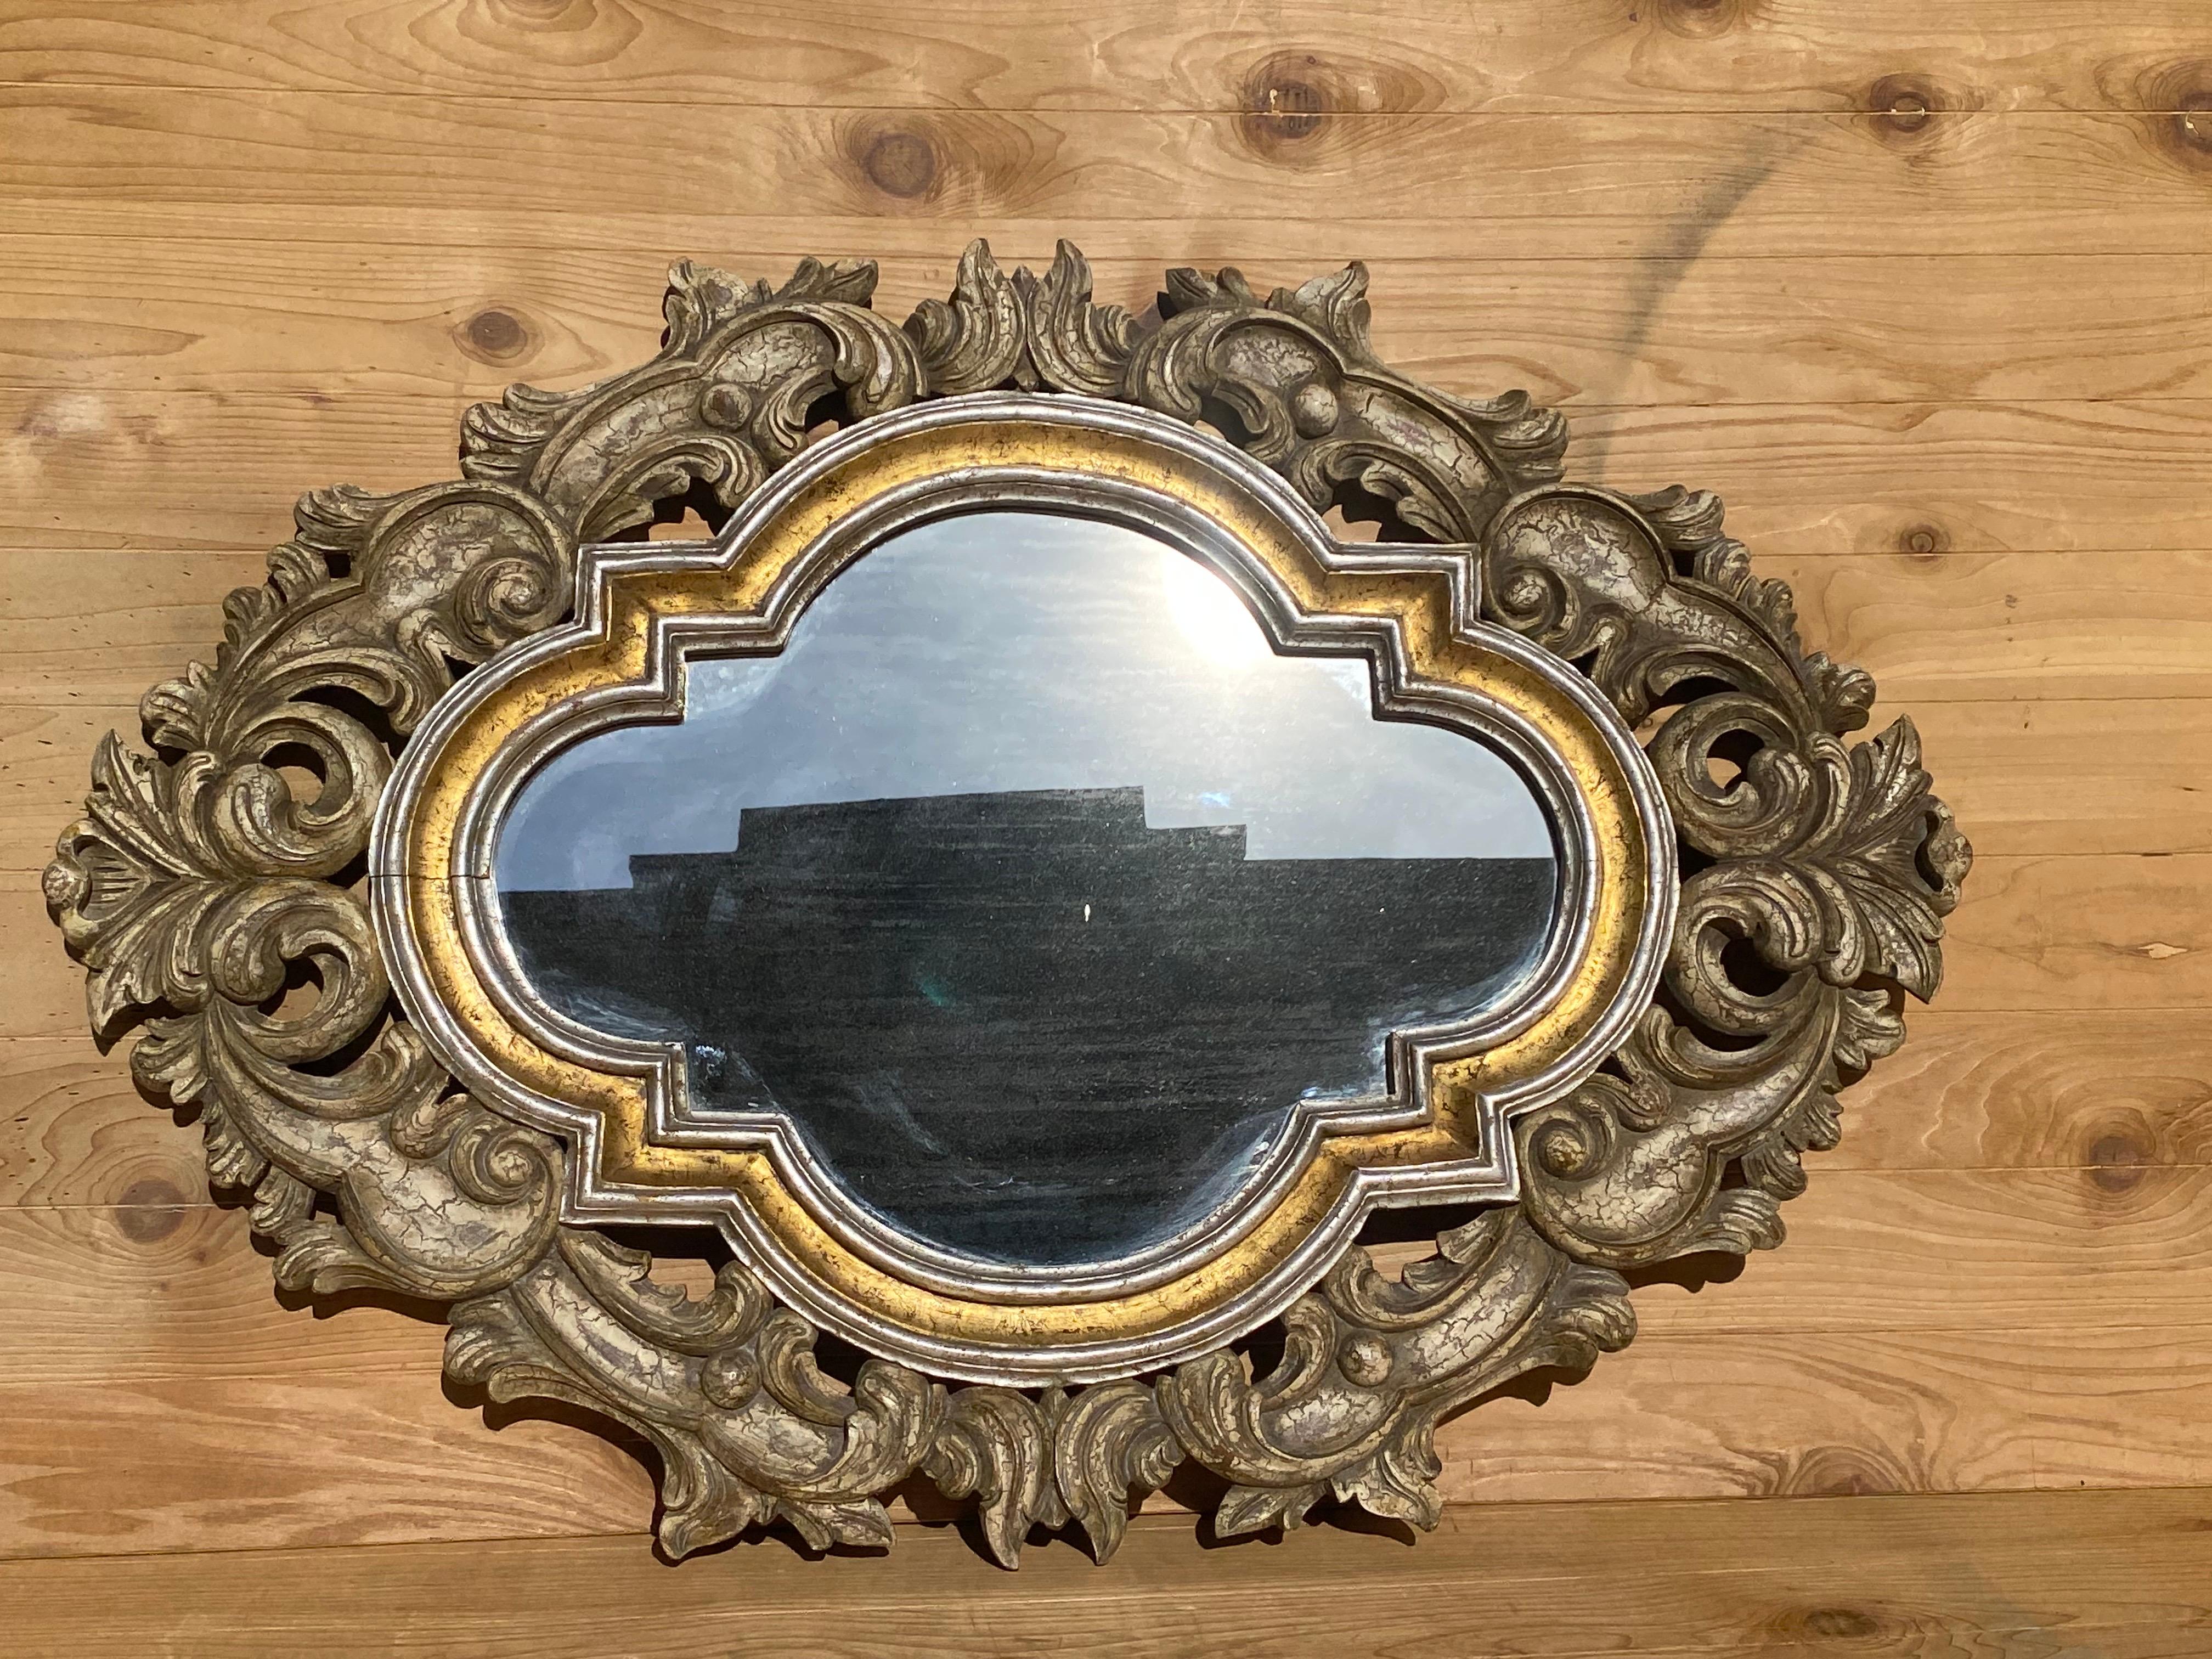 French Provincial Vintage French Style Ornate Carved Wall Mirror by John Richard For Sale